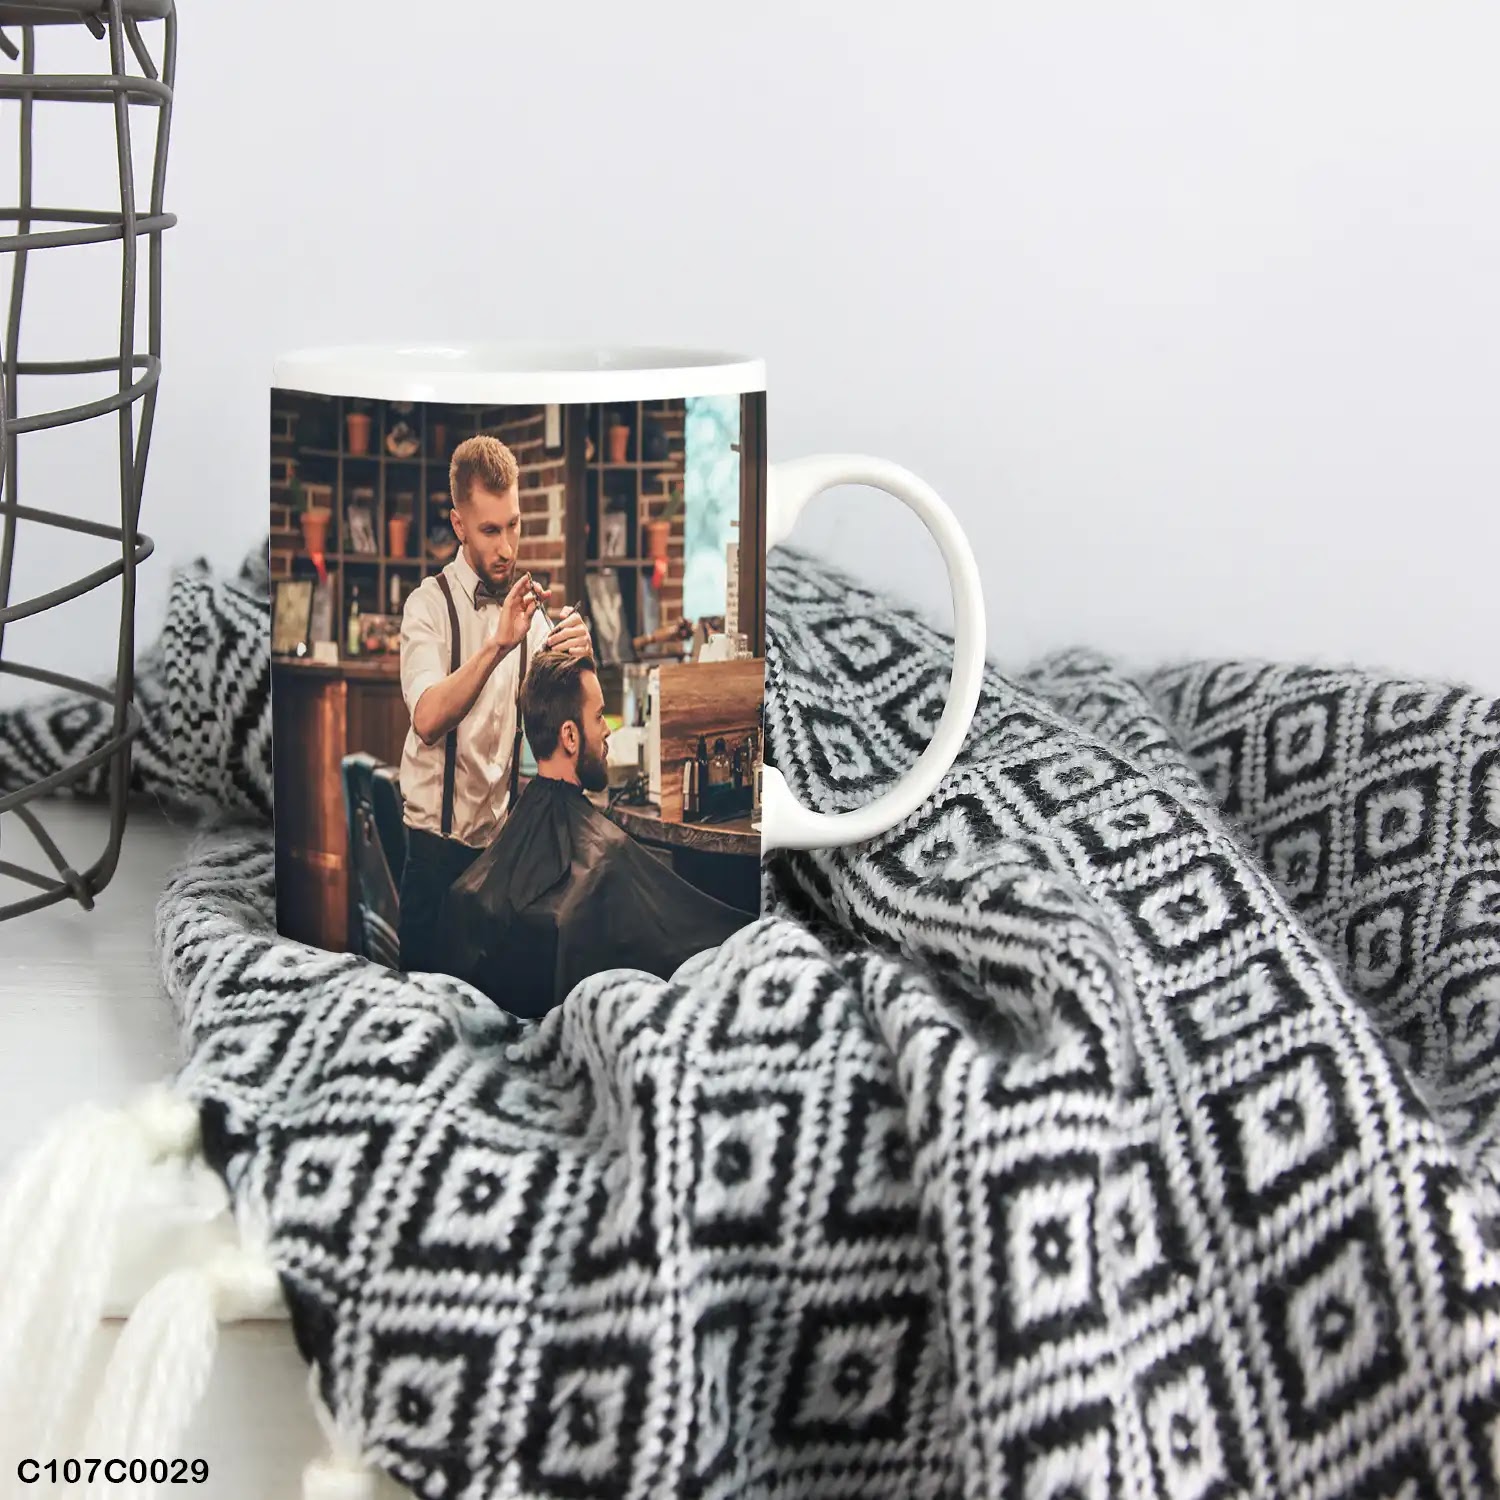 A mug (cup) printed with an image of Men's barber shop